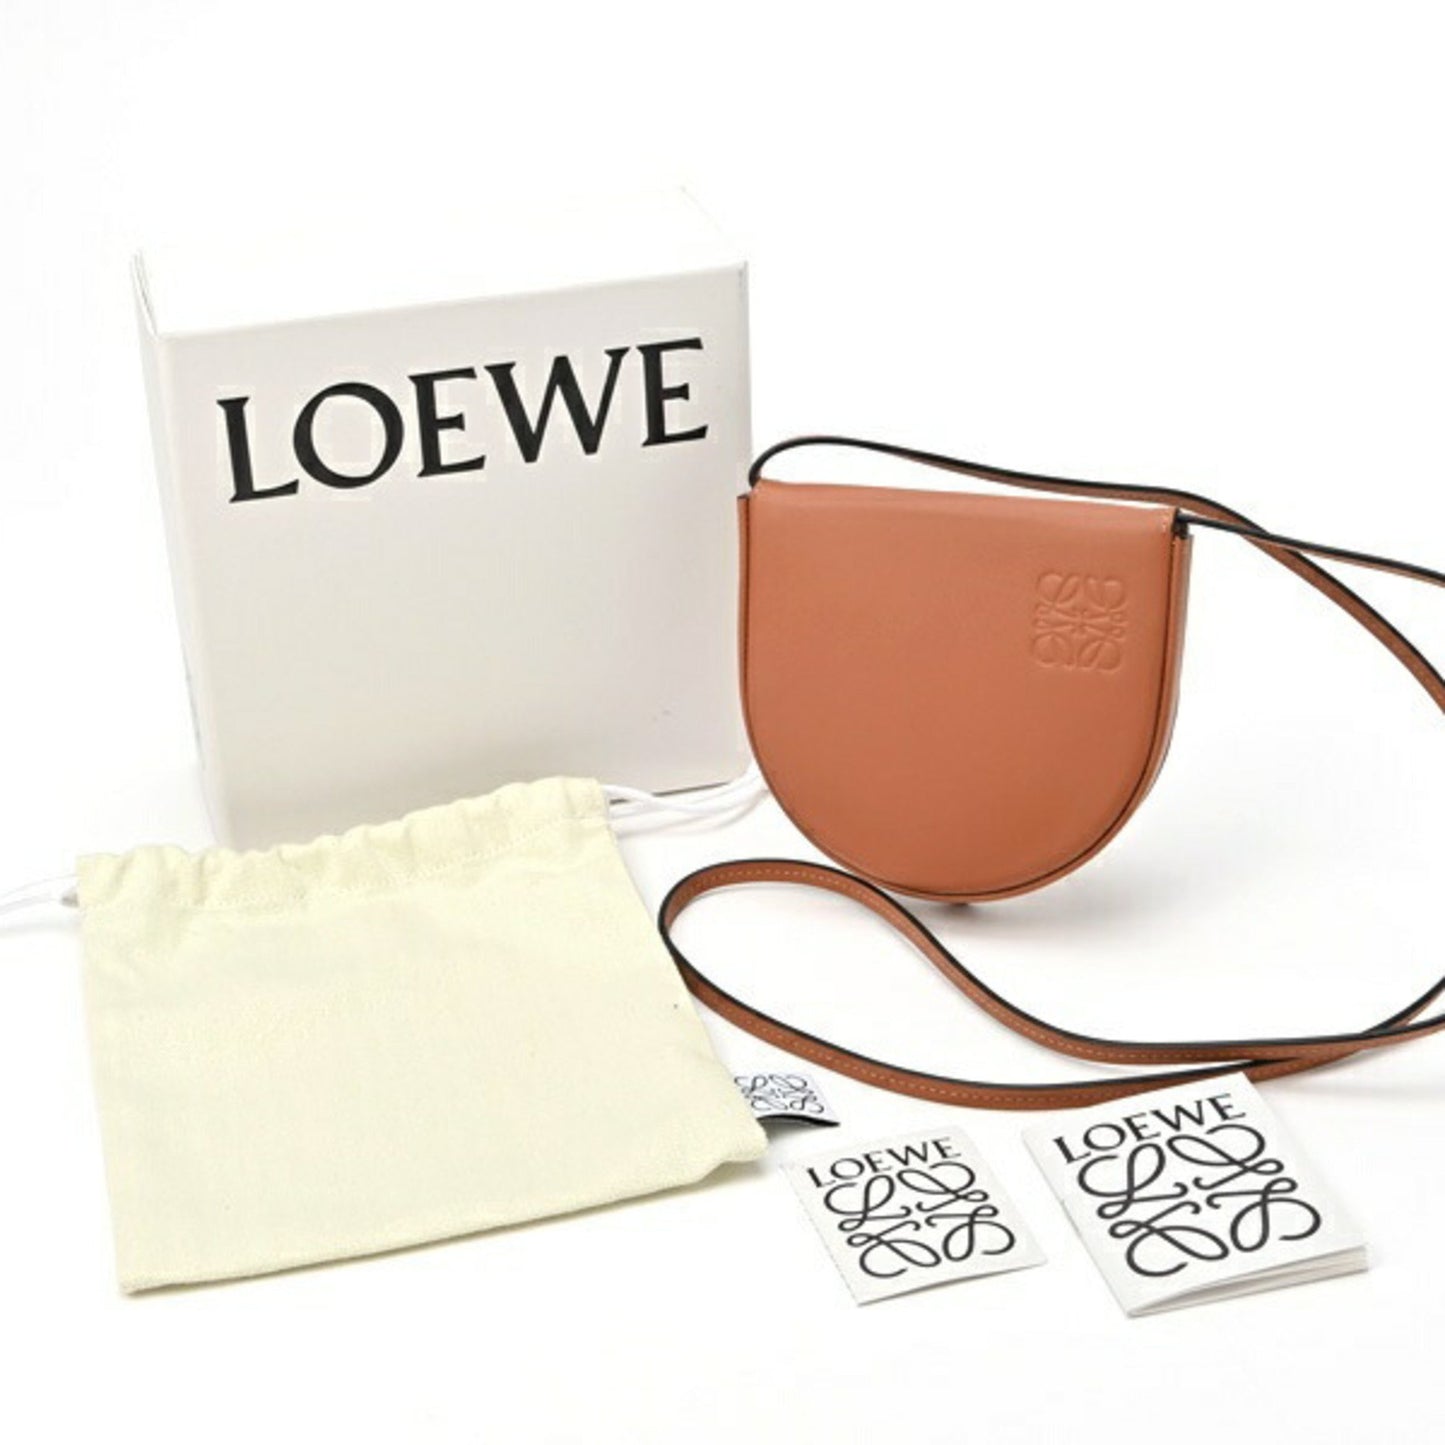 Loewe Women's Luxurious Brown Leather Pouch and Shoulder Bag for Women by Loewe in Brown